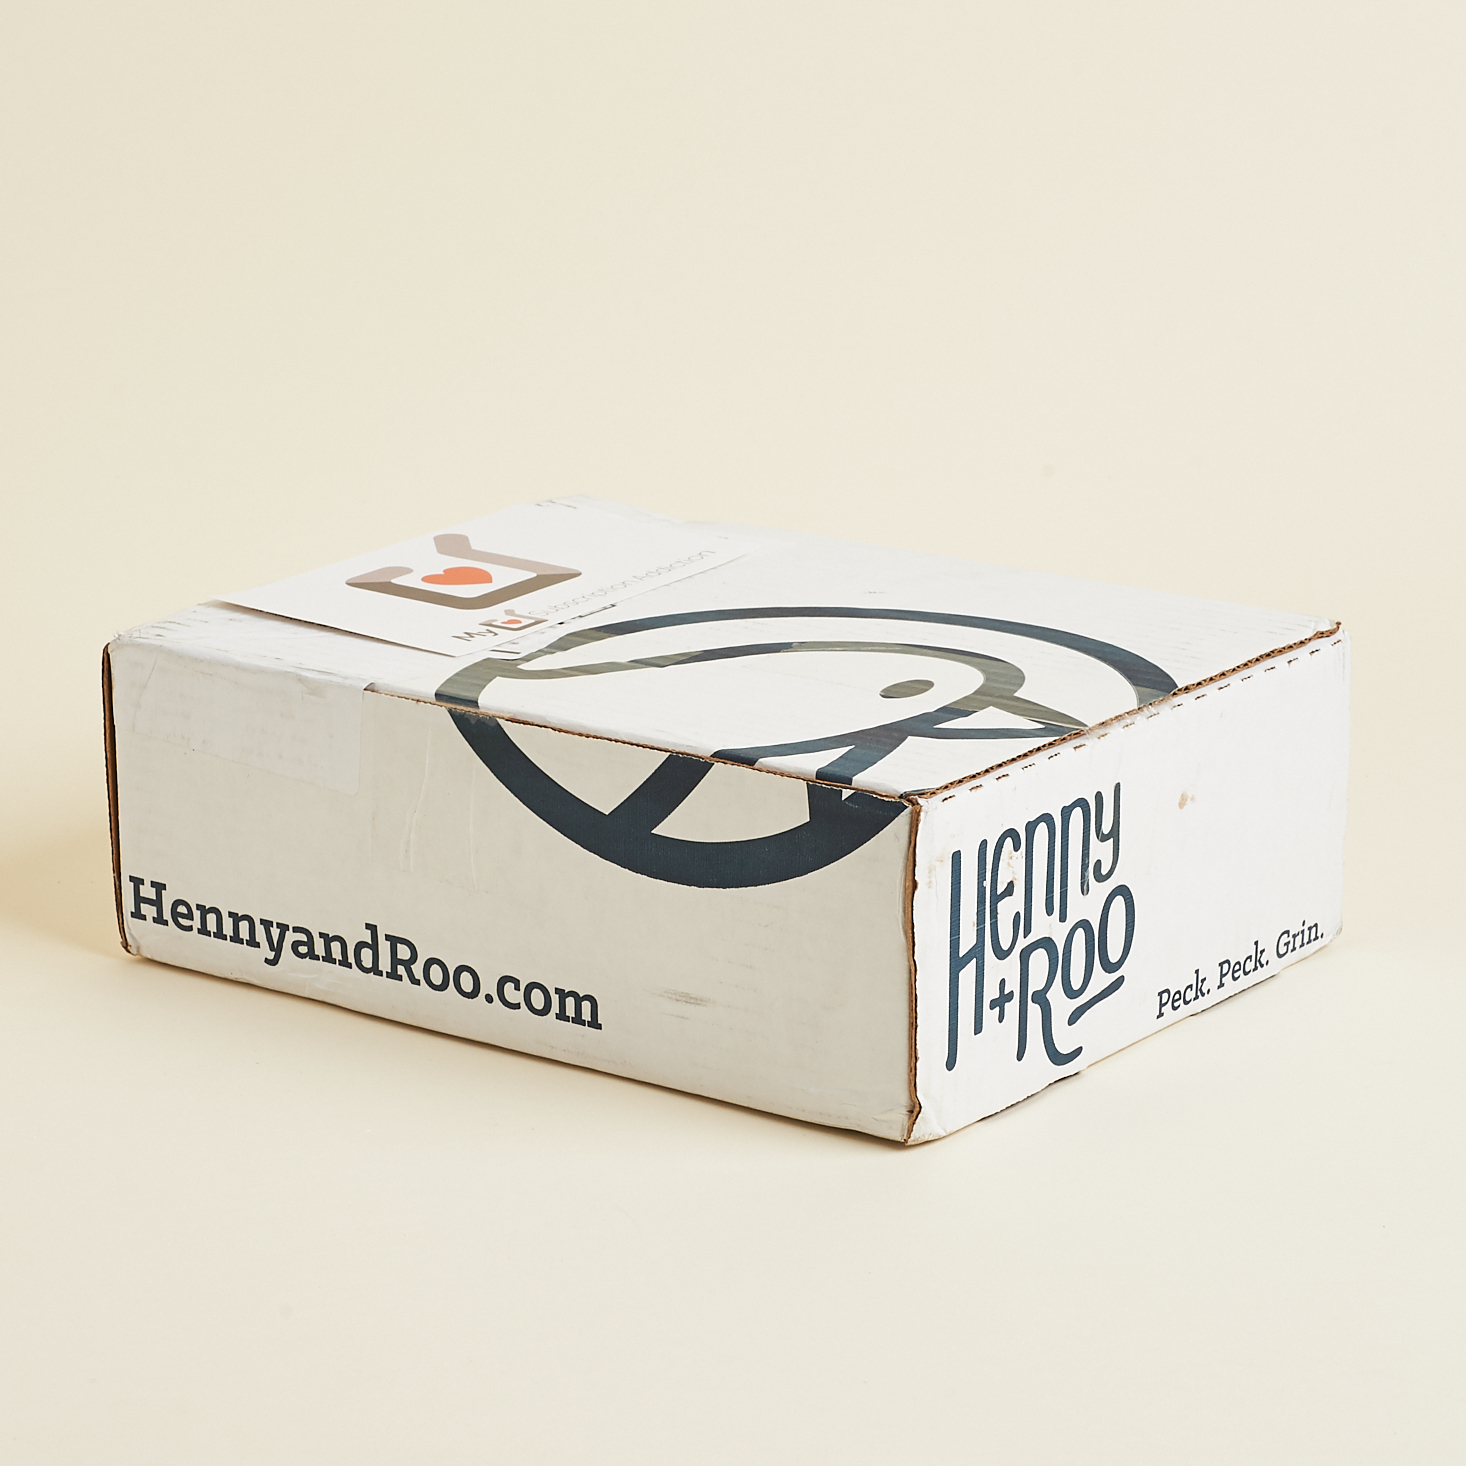 Henny+Roo Chicken Subscription Box Review – September 2019